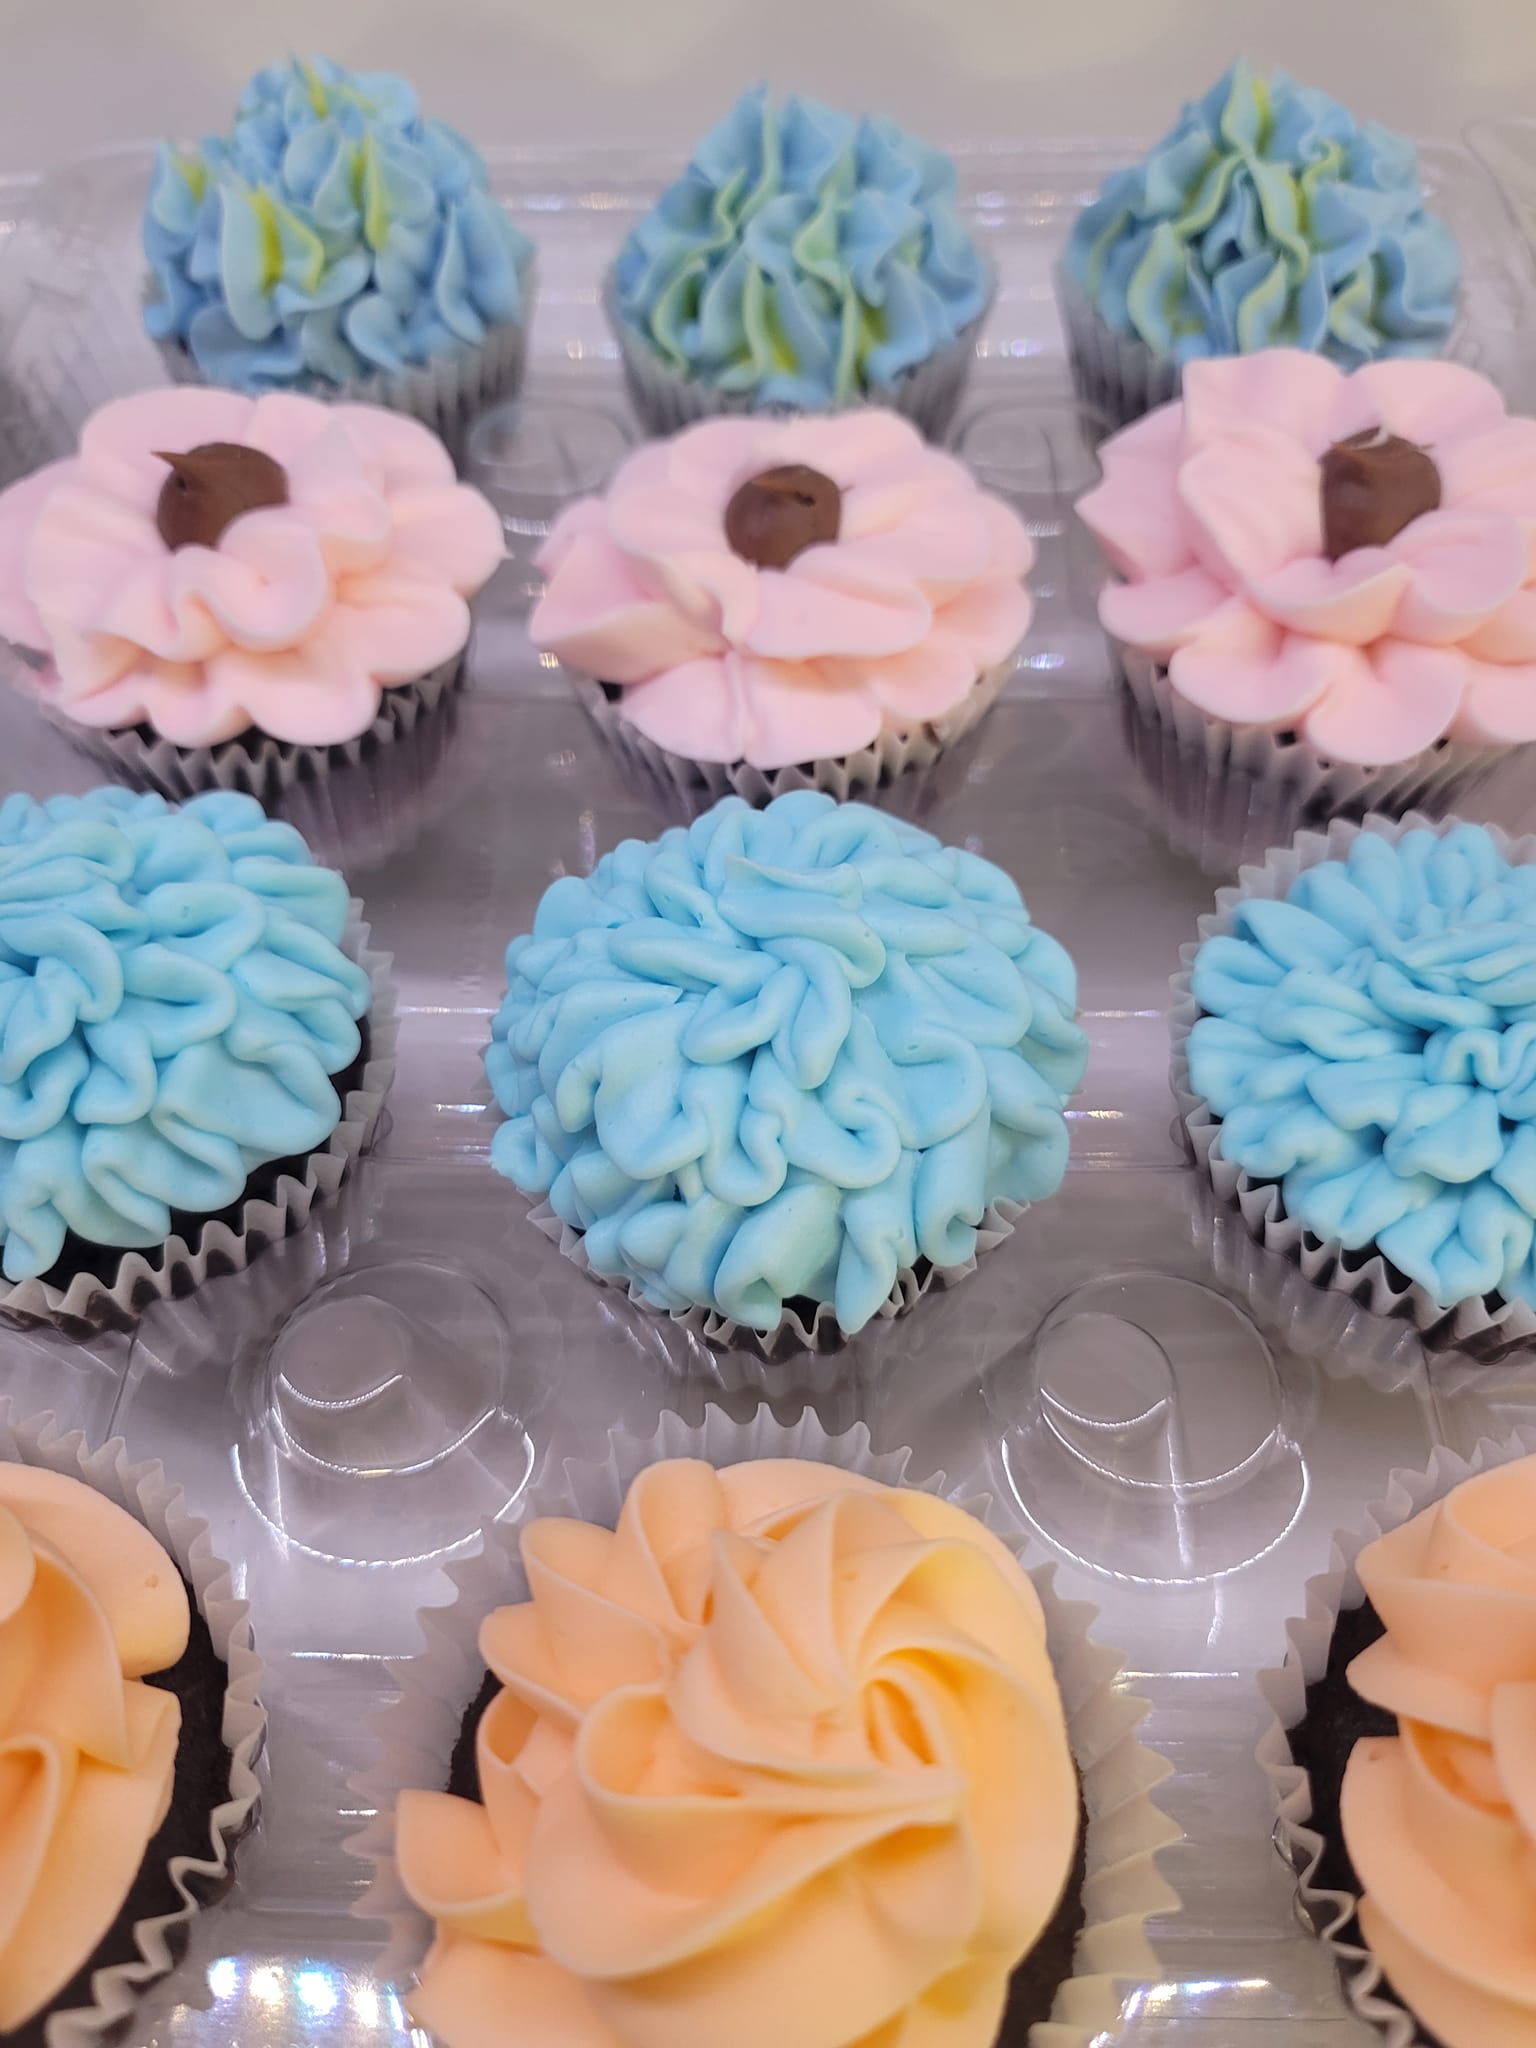 A tray of cupcakes decorated with blue, pink and orange flowers.